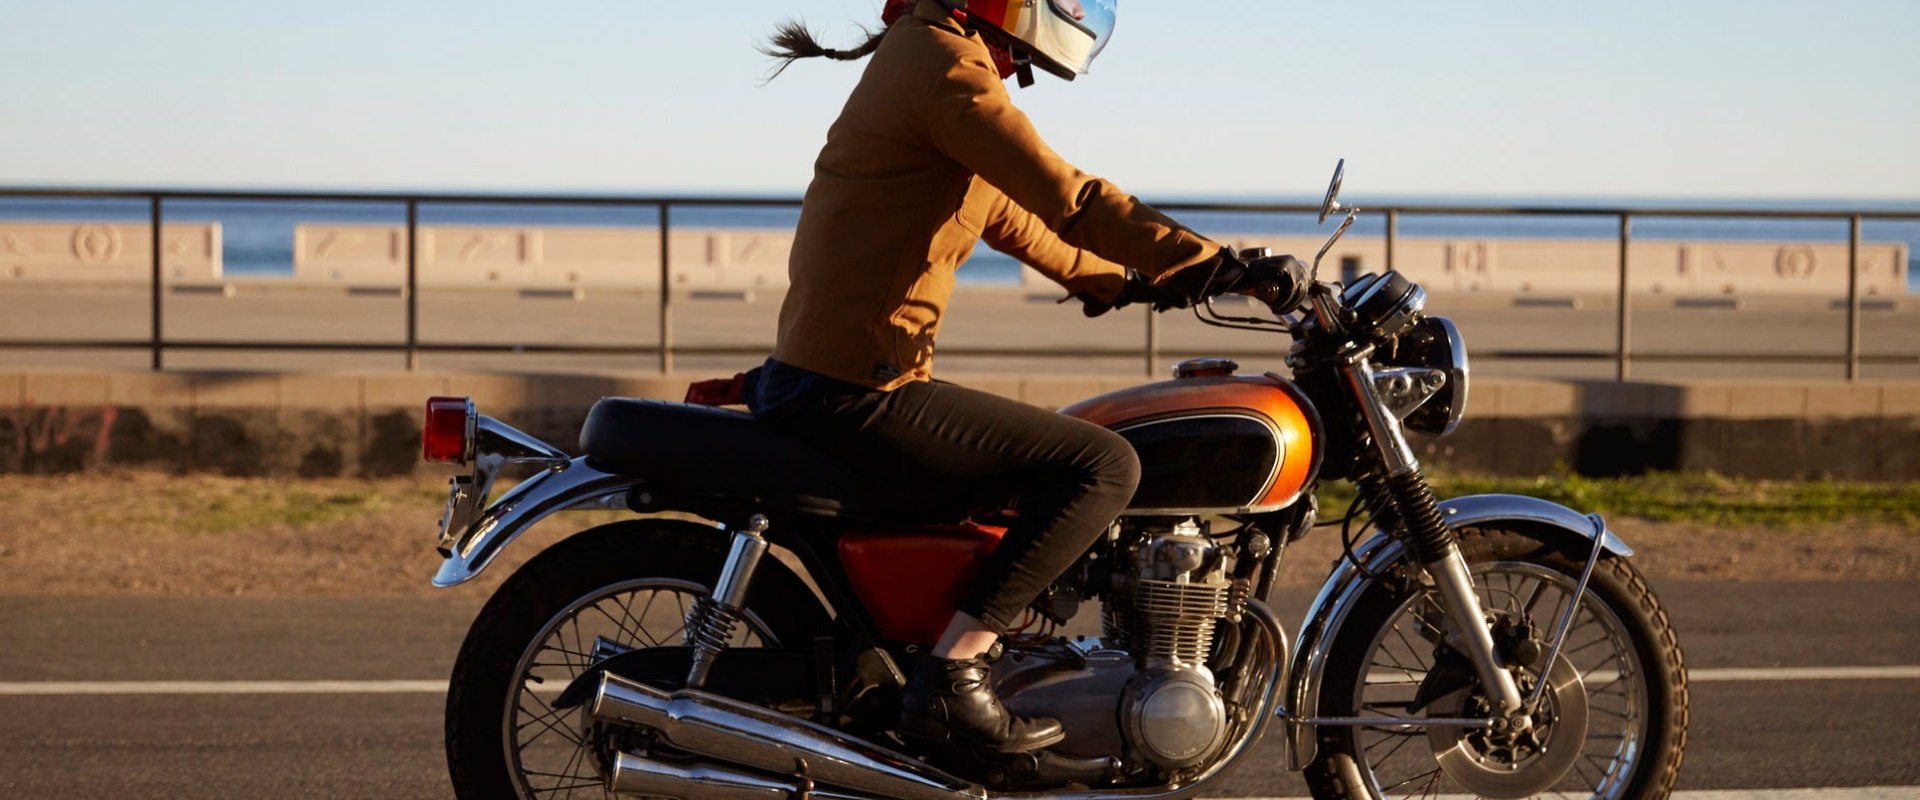 How Much Does Motorcycle Insurance Cost For A 16 Year Old In Texas?